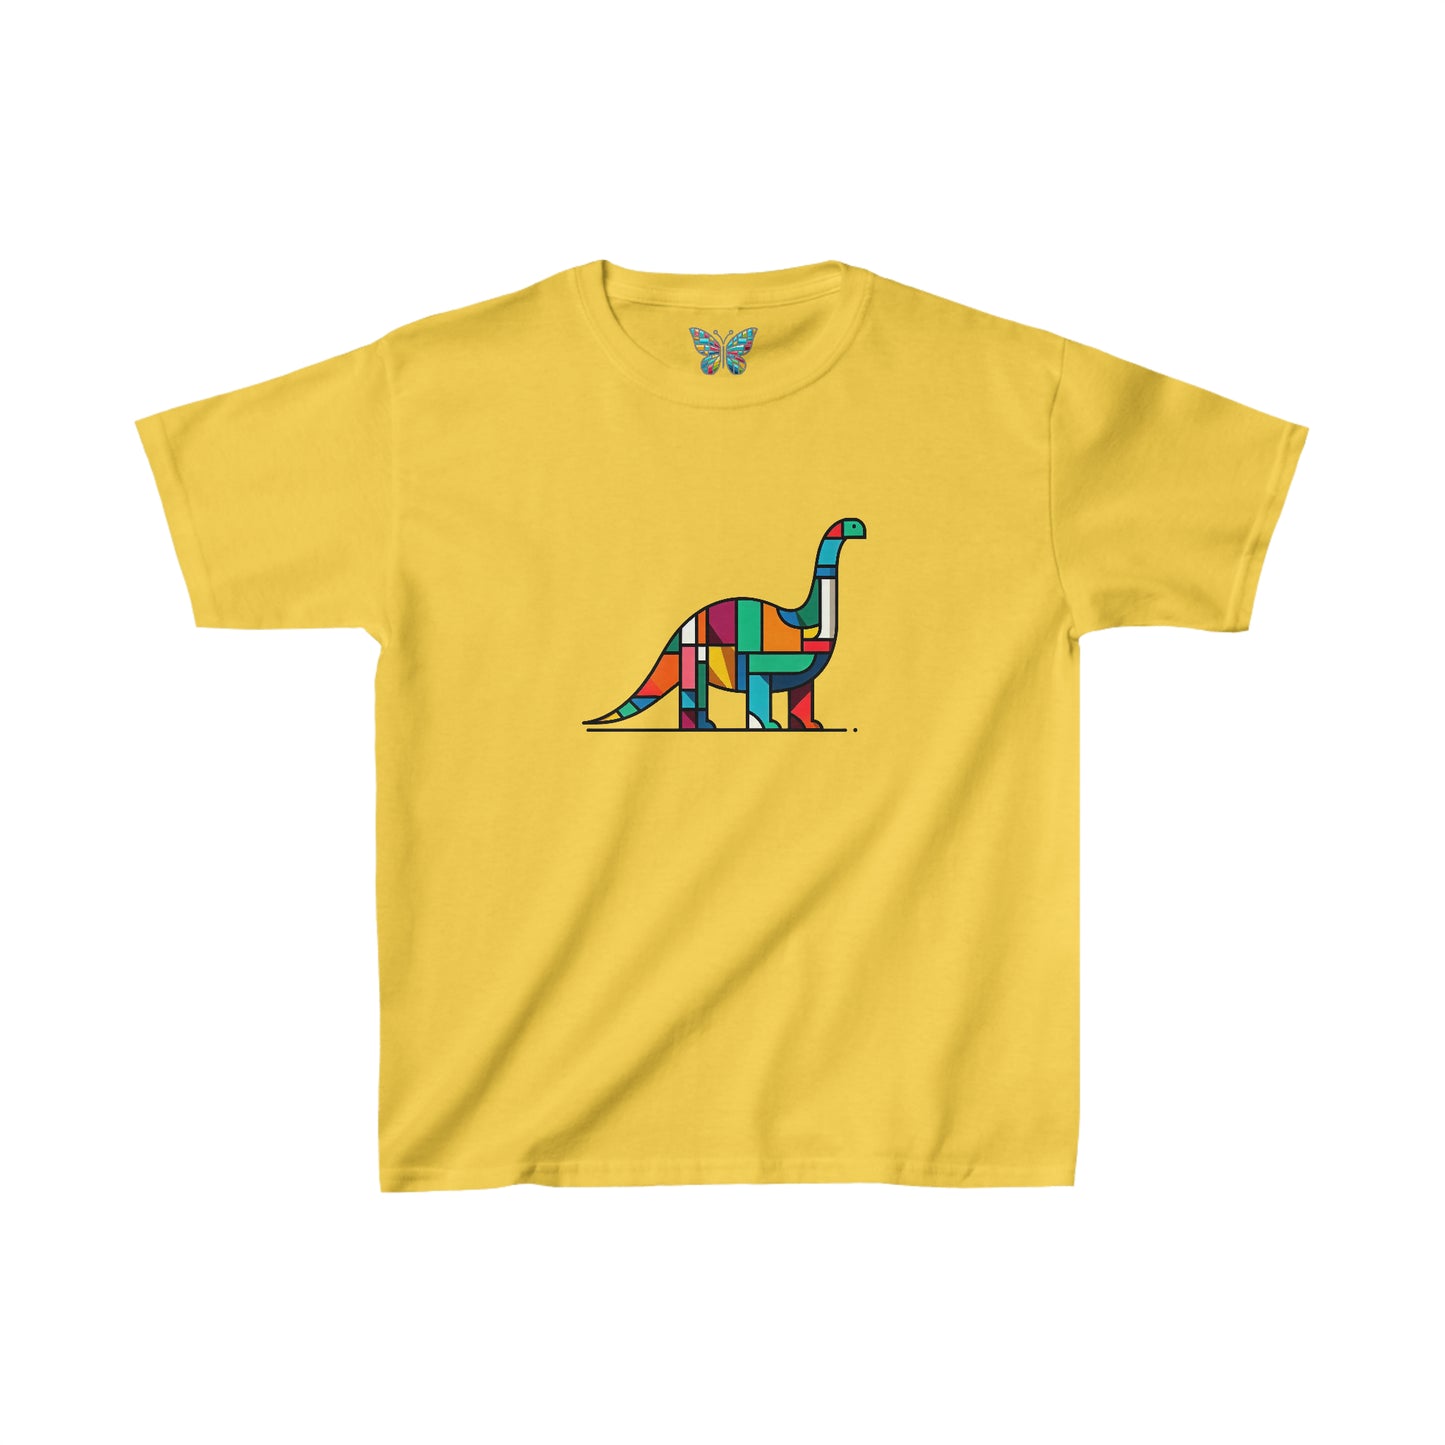 Brontosaurus Joviquity - Youth - Snazzle Tee